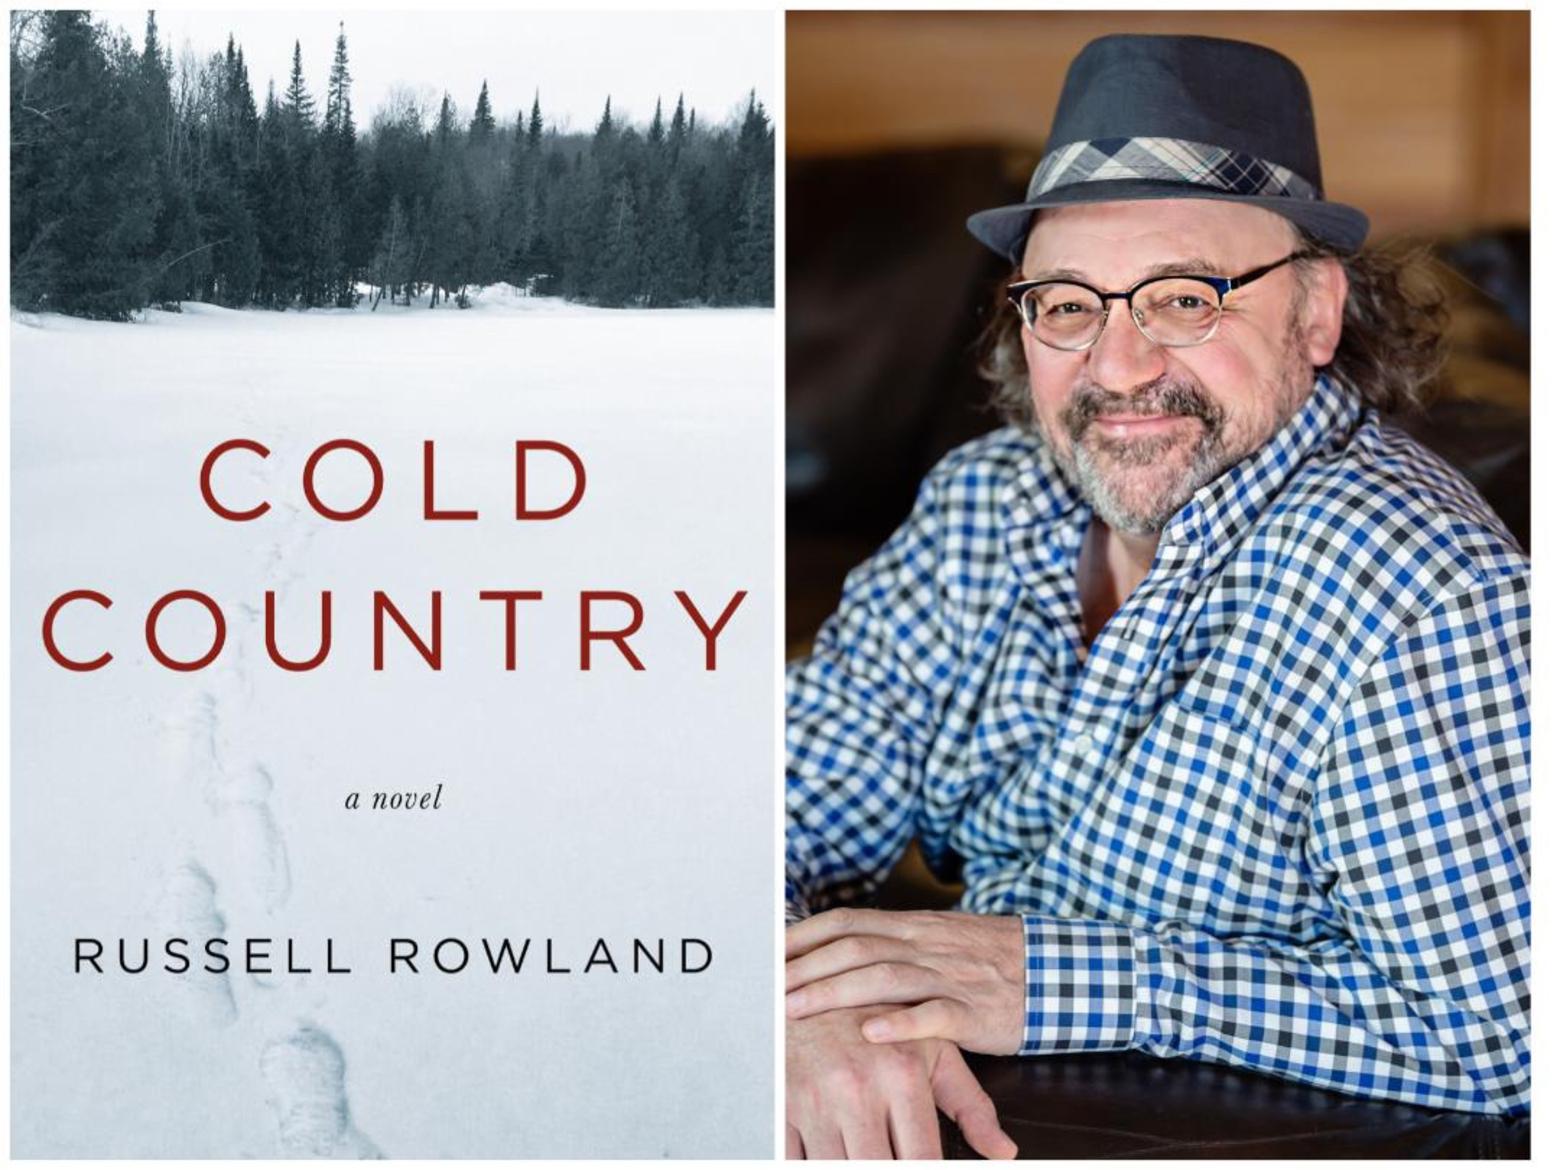 Russell Rowland and his novel which recently caught a fresh wave of acclaim.